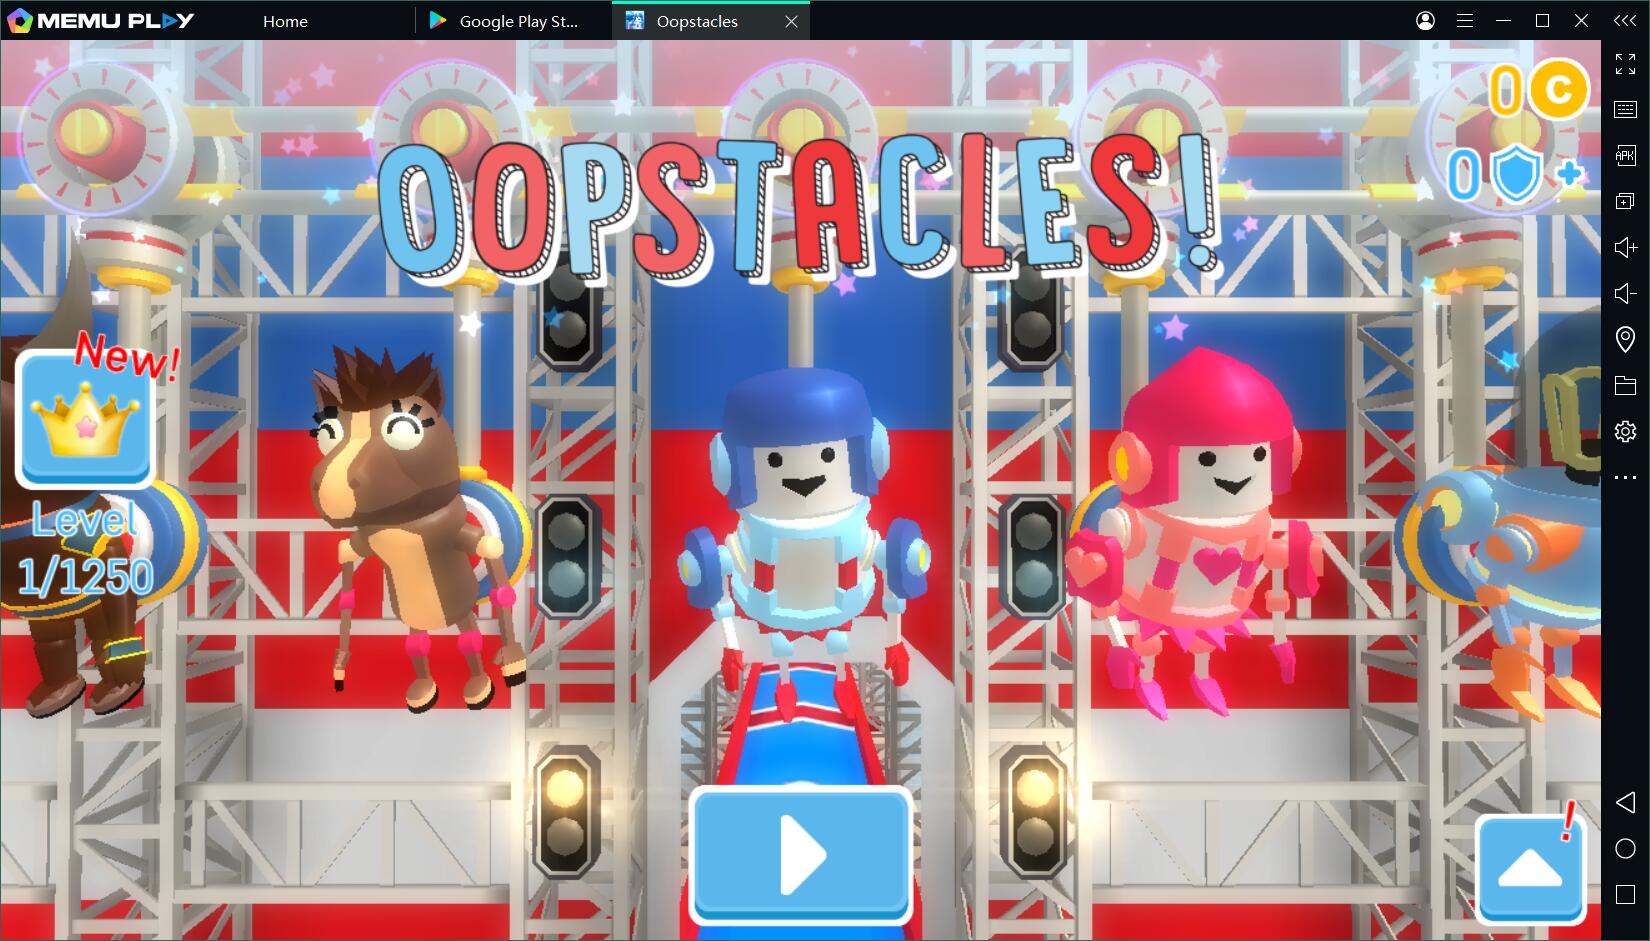 Play Oopstacles (Fall Guys Mobile) on PC with MEmu - MEmu Blog